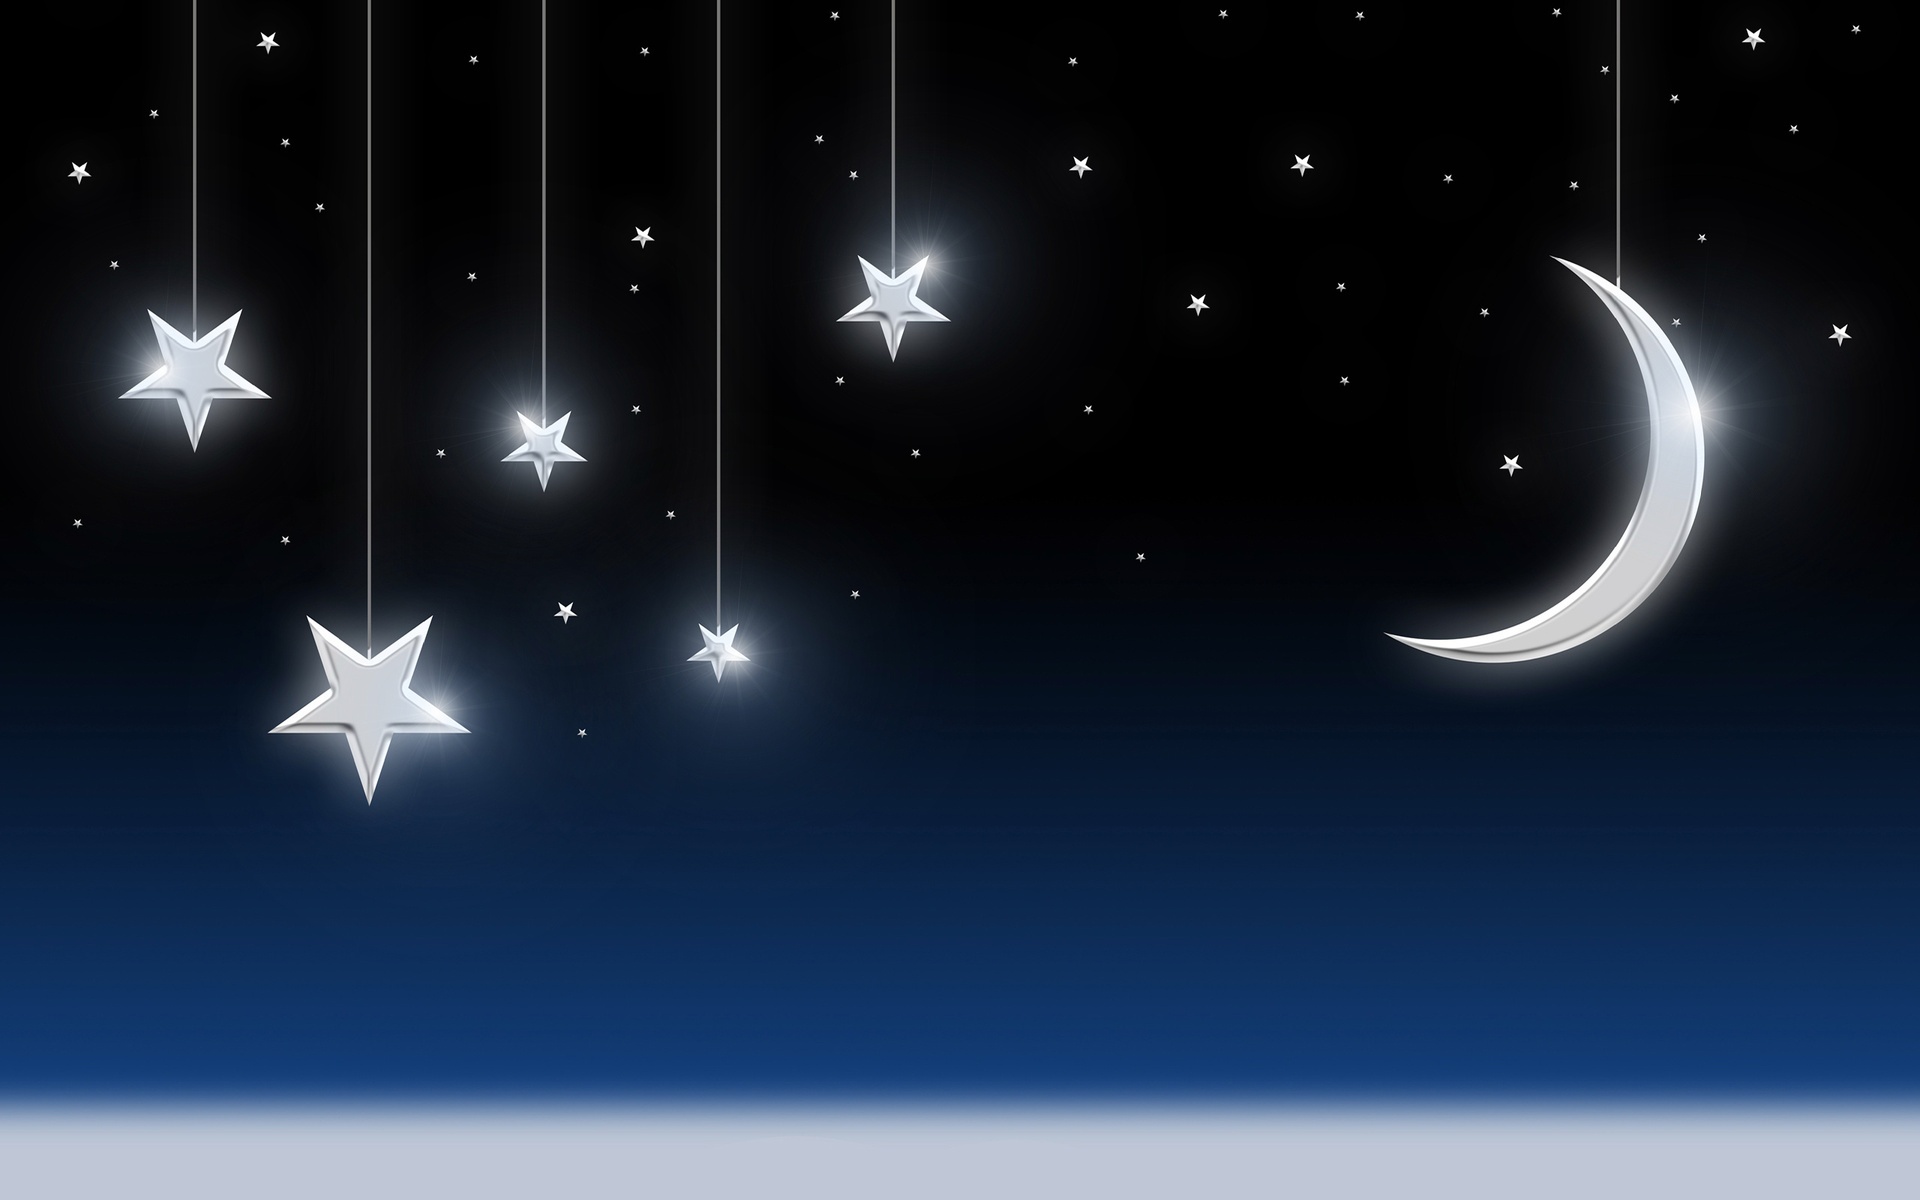 Stars and Moons Desktop Wallpaper   Pics about space